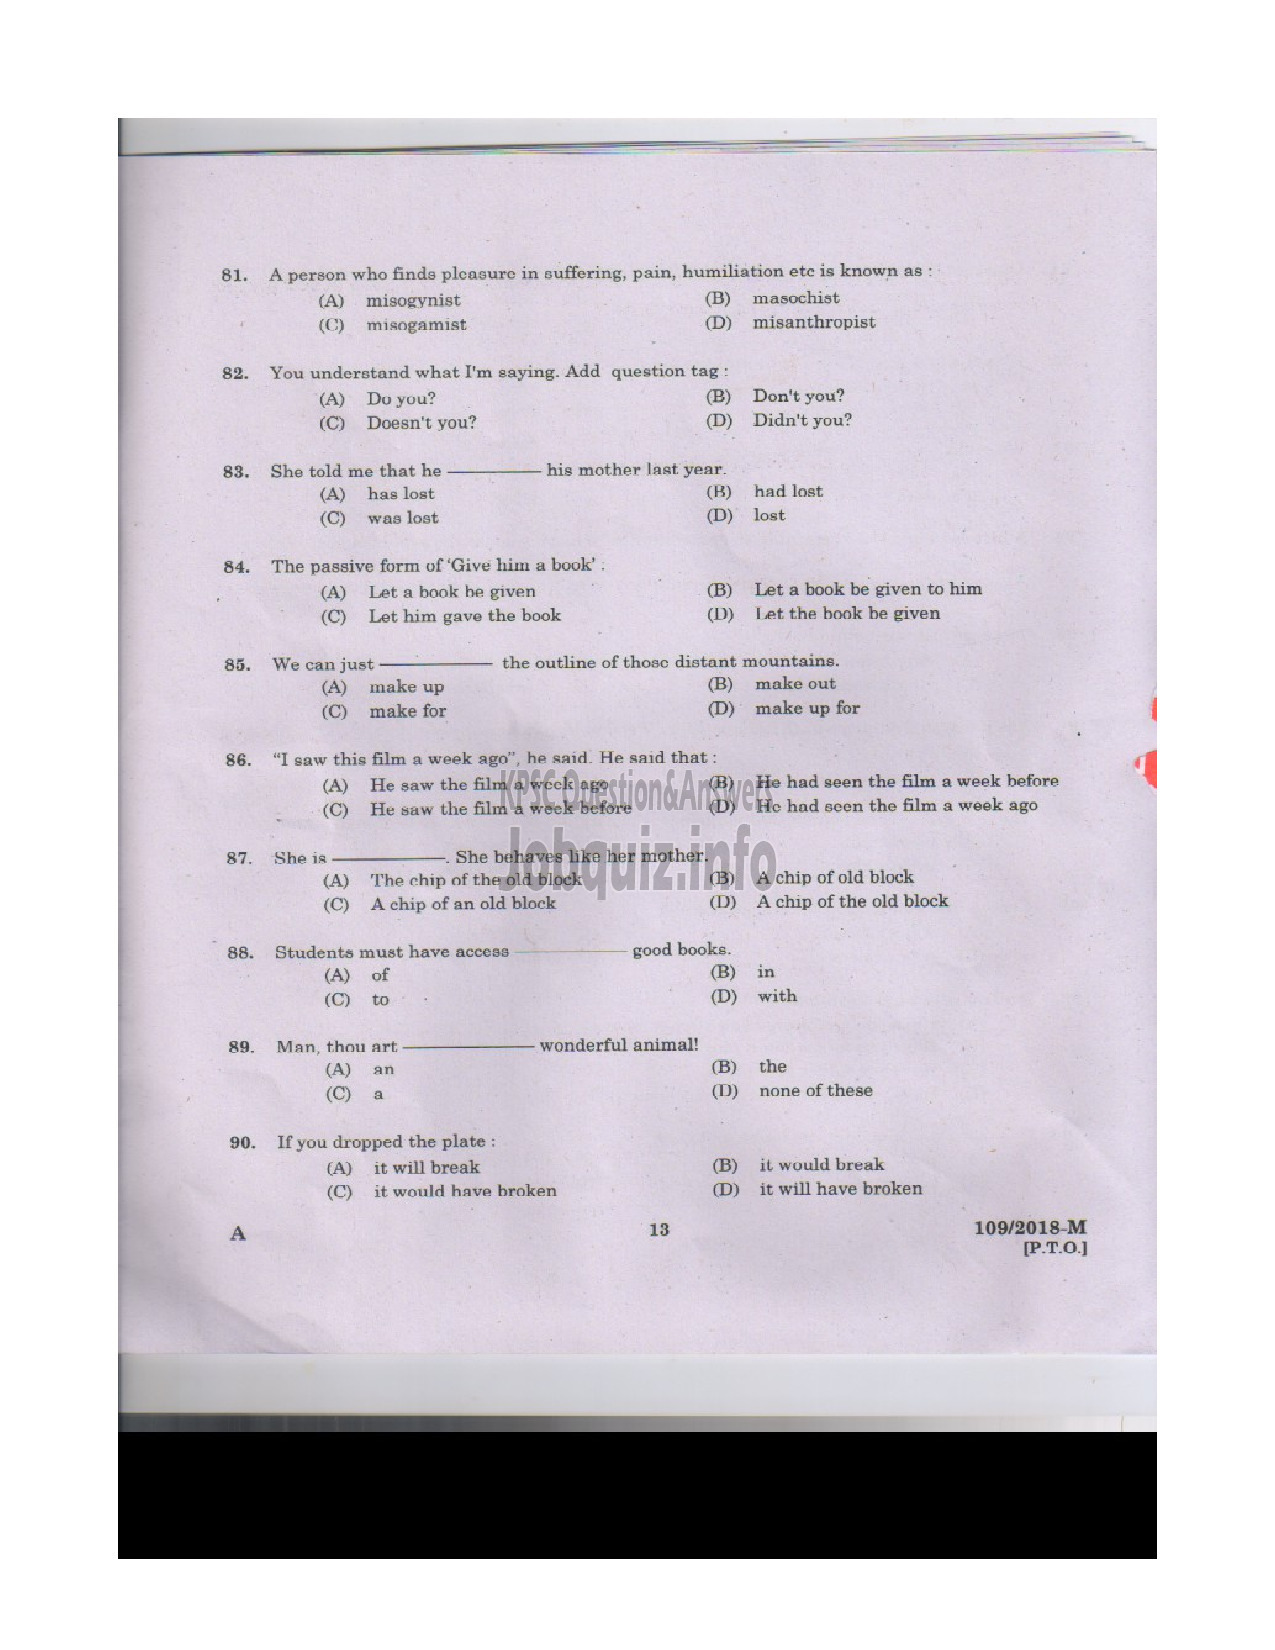 Kerala PSC Question Paper - ATTENDER GR II LIGHT KEEPER SIGNALLER CLERICAL ATTENDER FEMALE ASSISTANT PRISON OFFICER LAB ATTENDER HOMOEOPATHY Malayalam/English -12